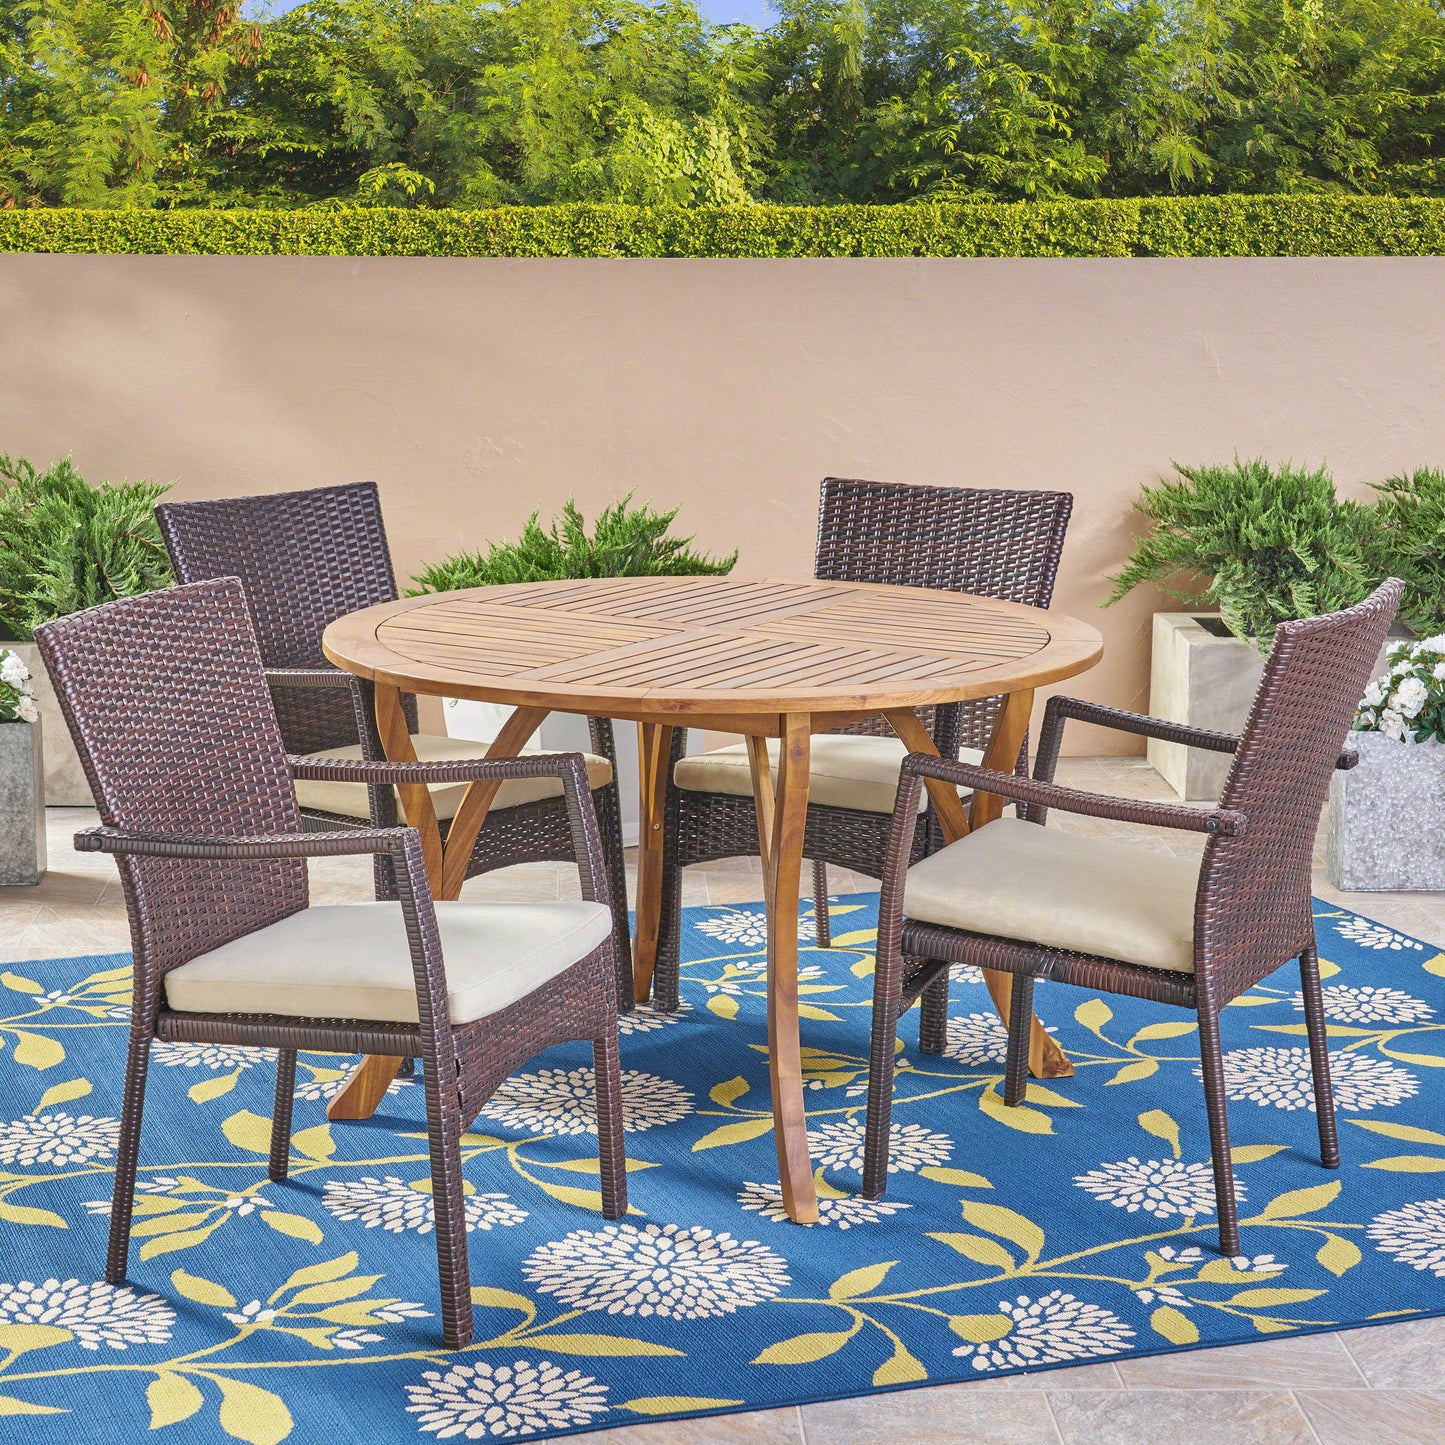 Baldry Outdoor 5 Piece Acacia Wood and Wicker Dining Set